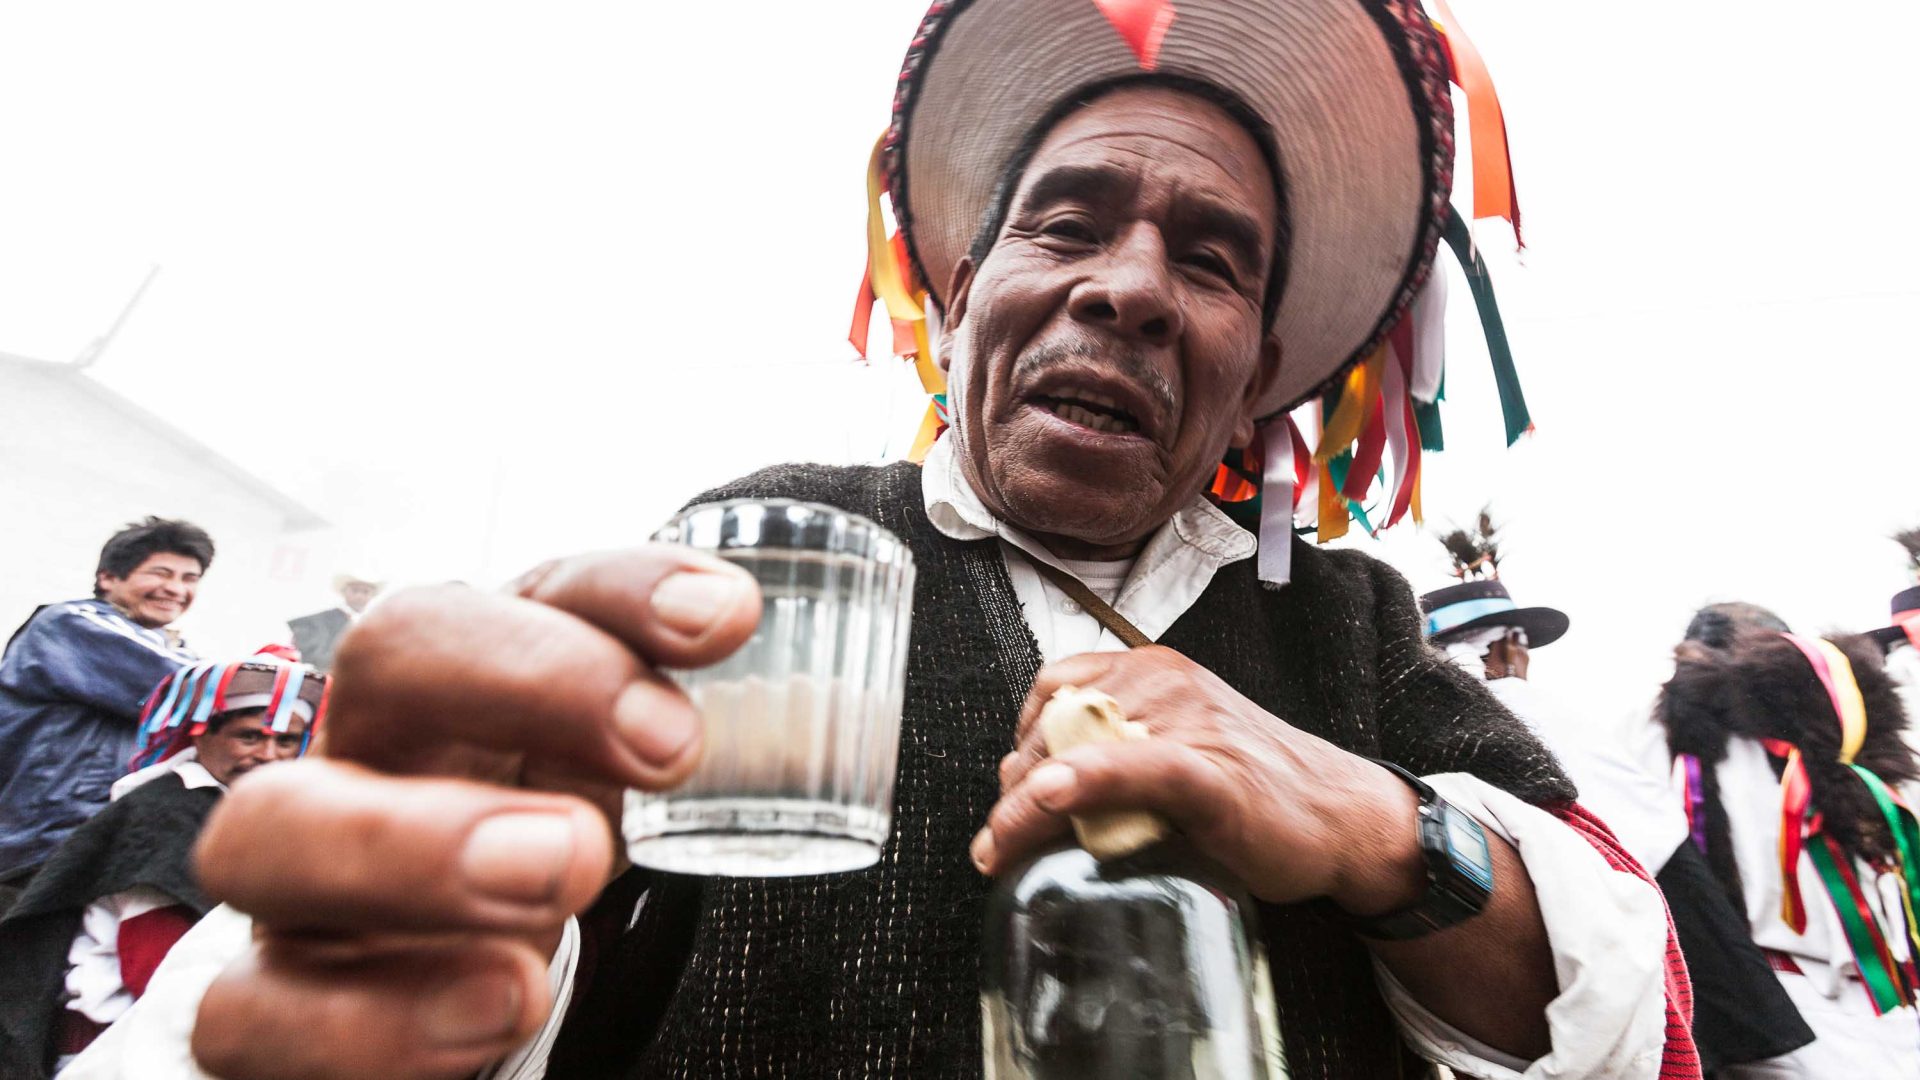 “The promise of joy”: This ancient Mayan spirit is coming to a cocktail bar near you